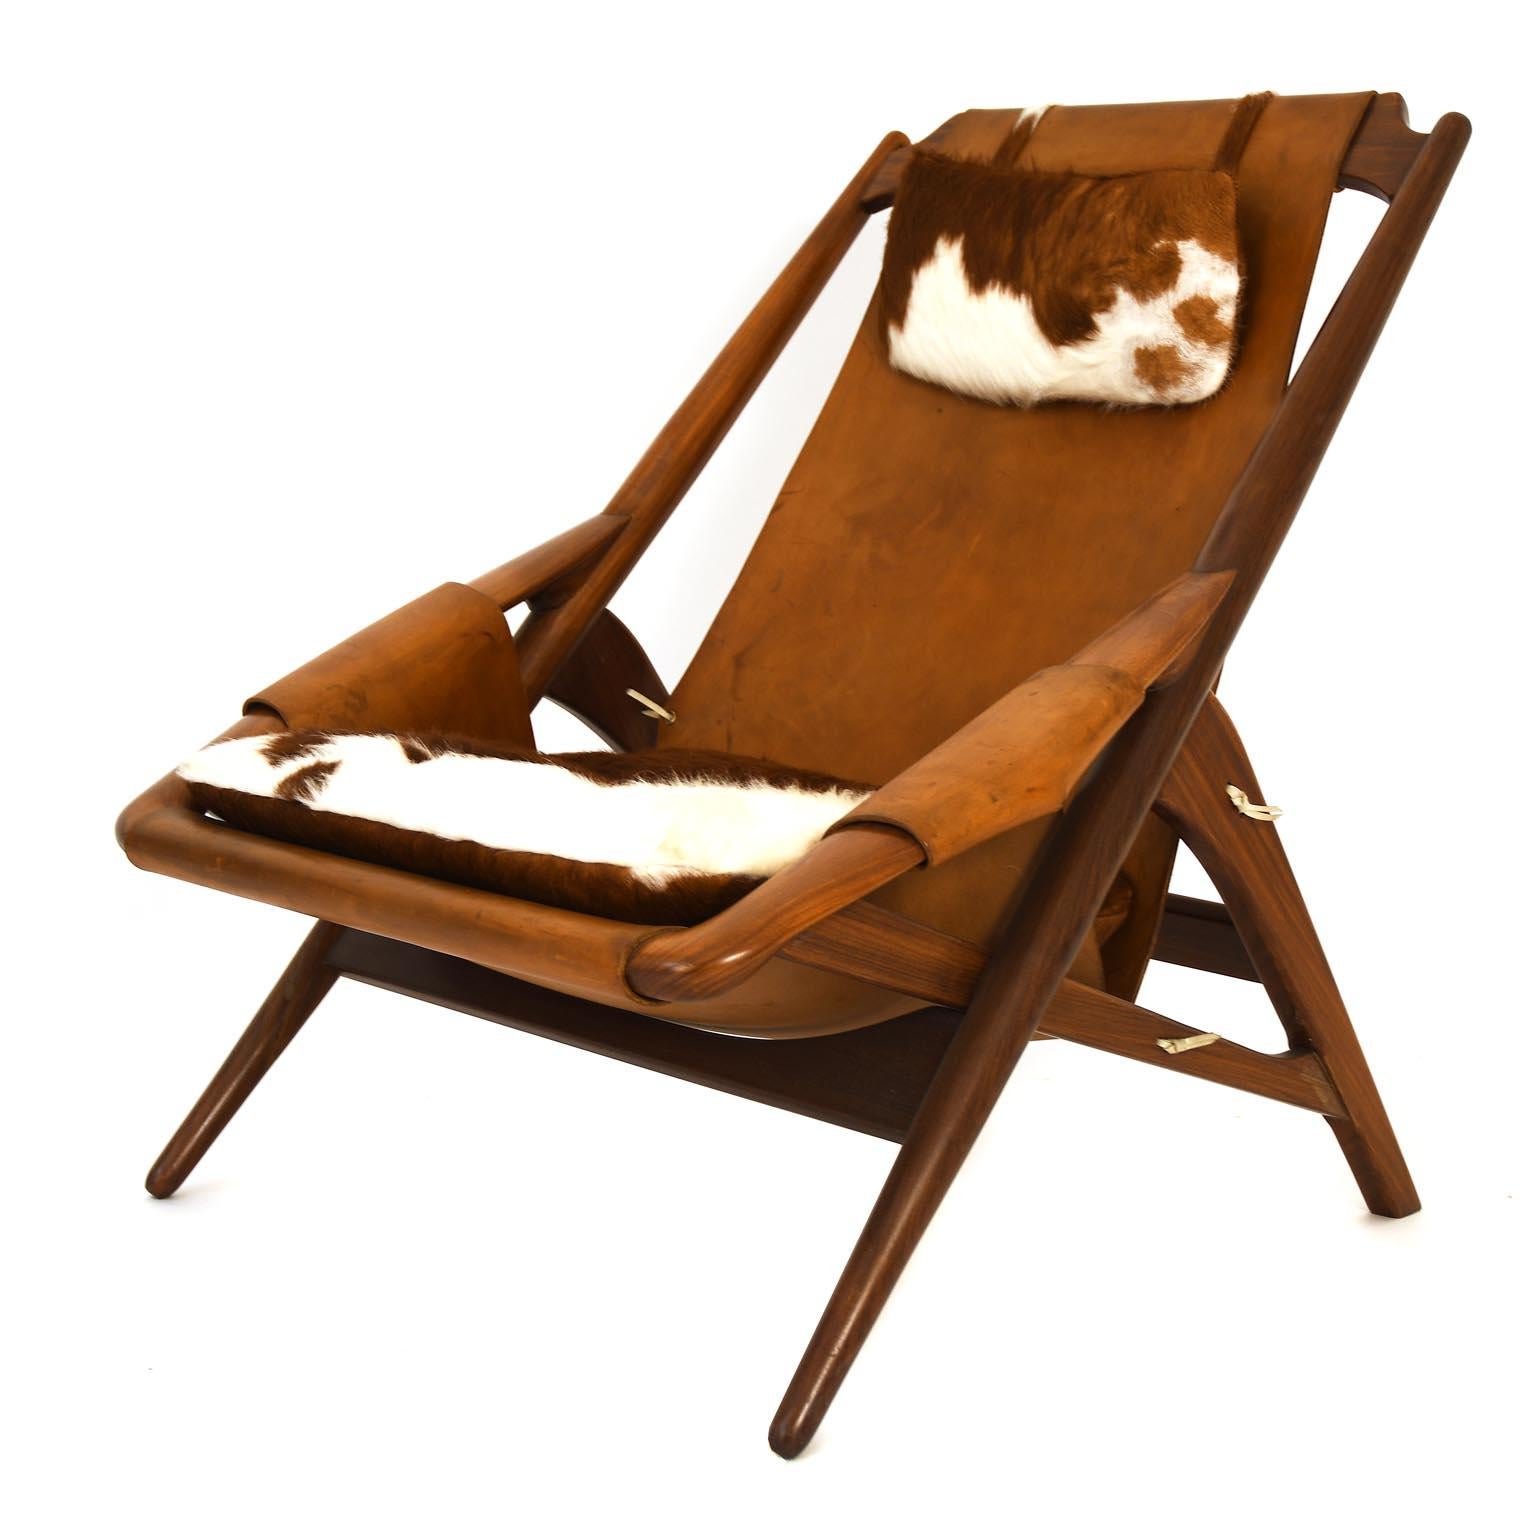 Mid-20th Century Armchair Arne Tidemand-Ruud Made for ISA Bergamo Italy Teak and Leather